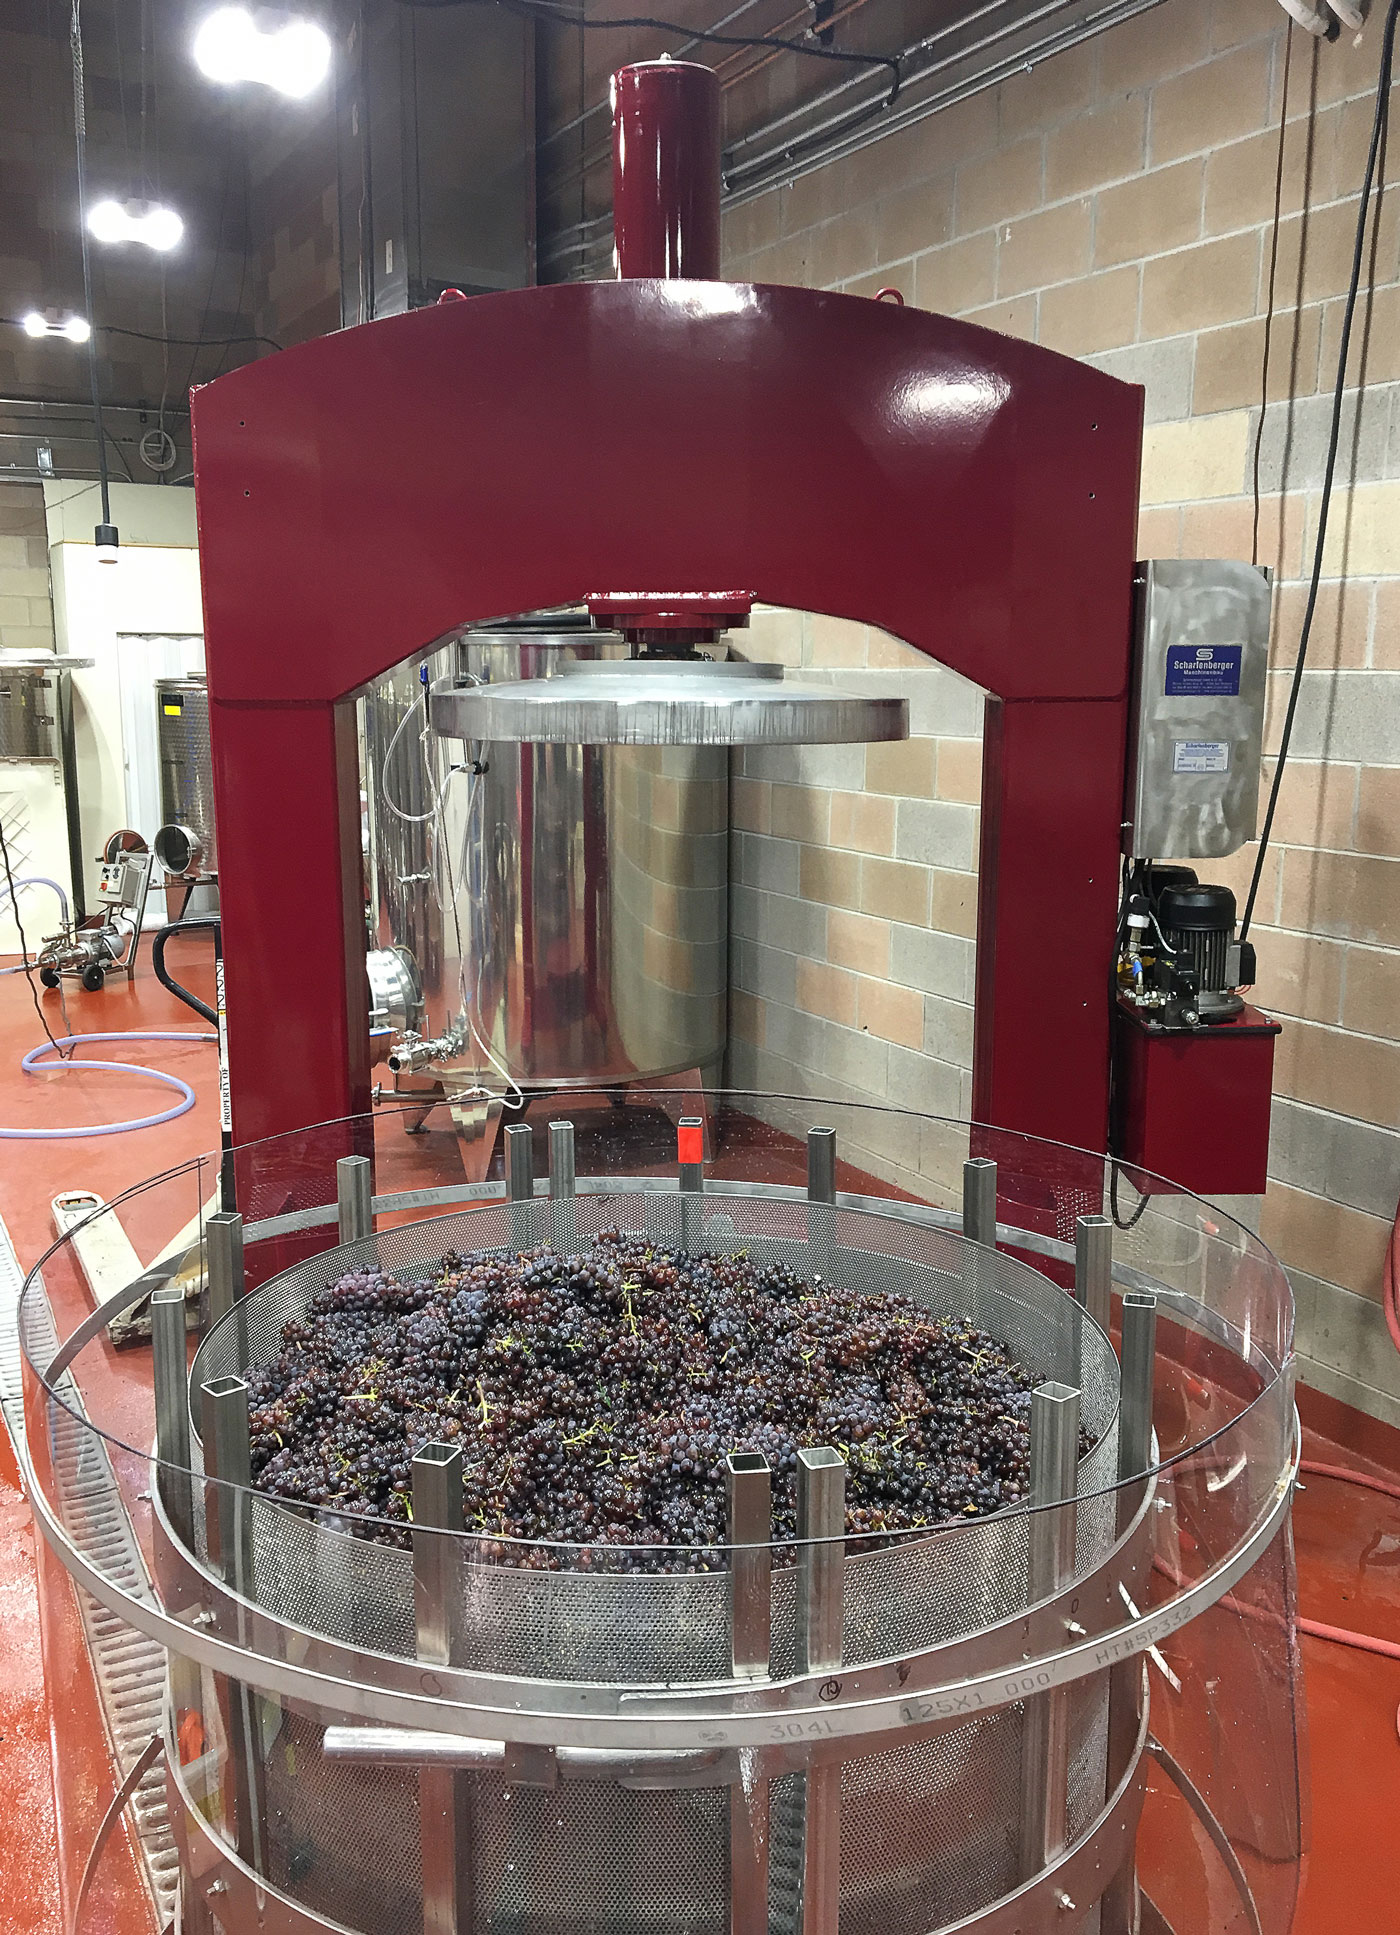 Grapes in wine production equipment